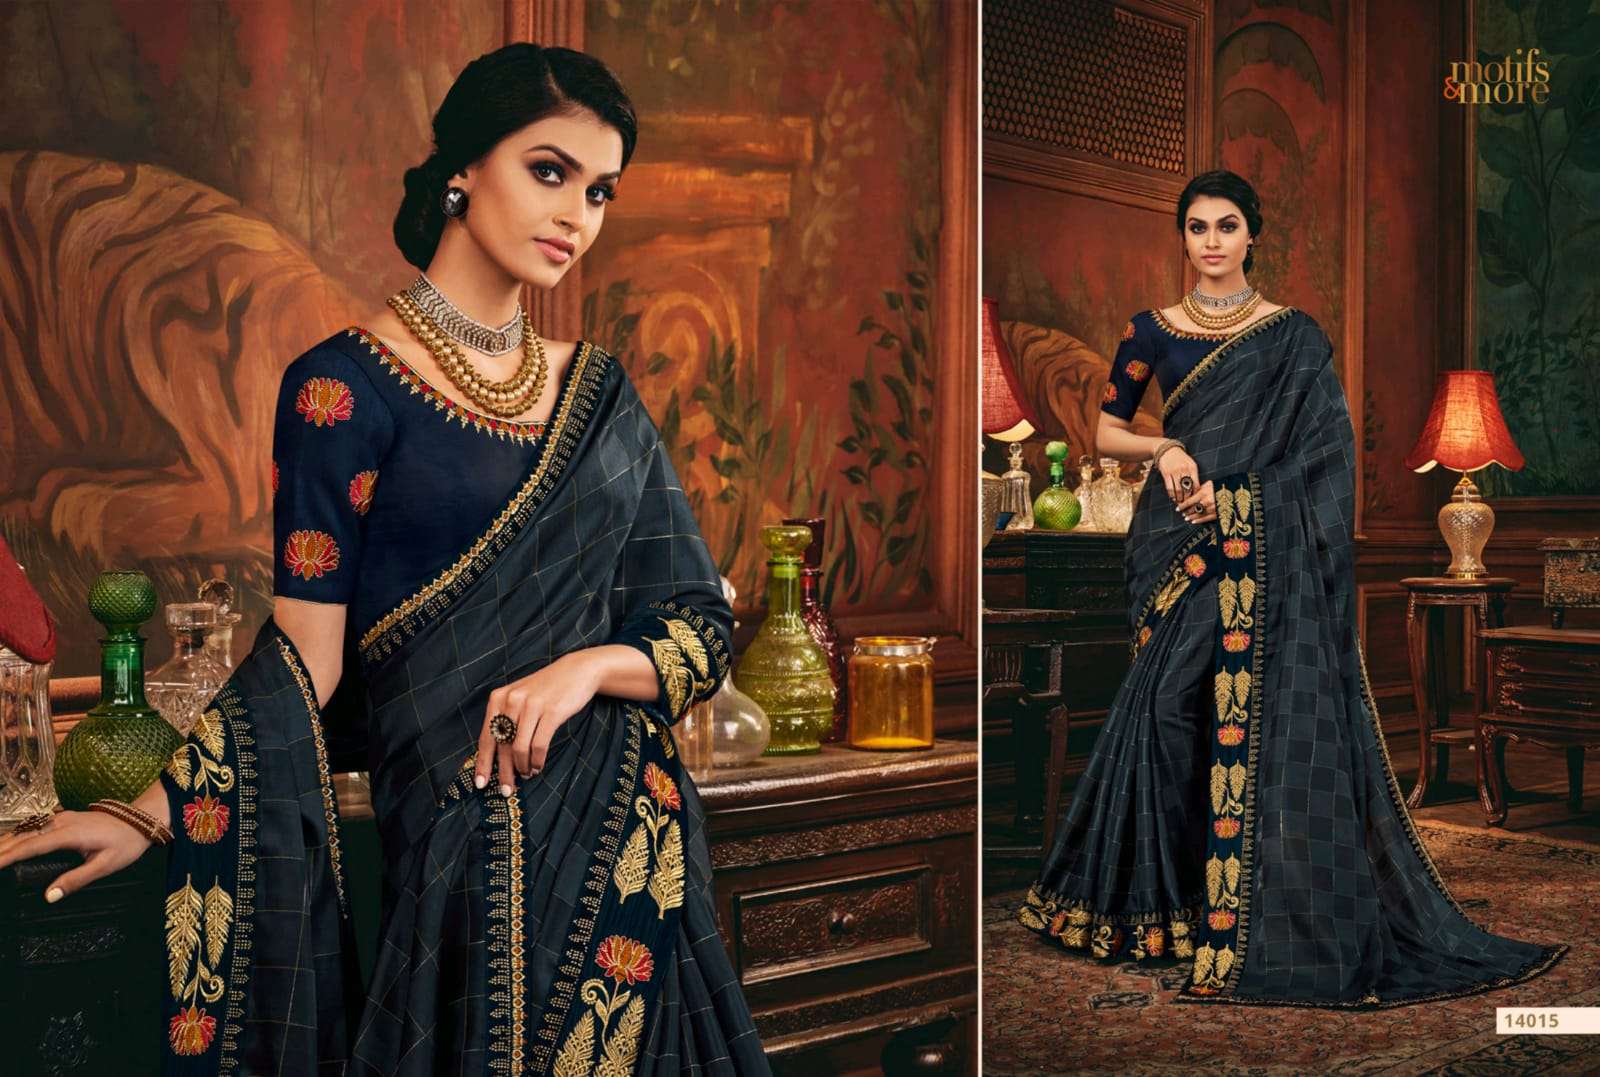 Motifs And More Vol-14 Series 14001 To 14016 Rich Look Designer  Function Wear Indian Saree Wholesaler